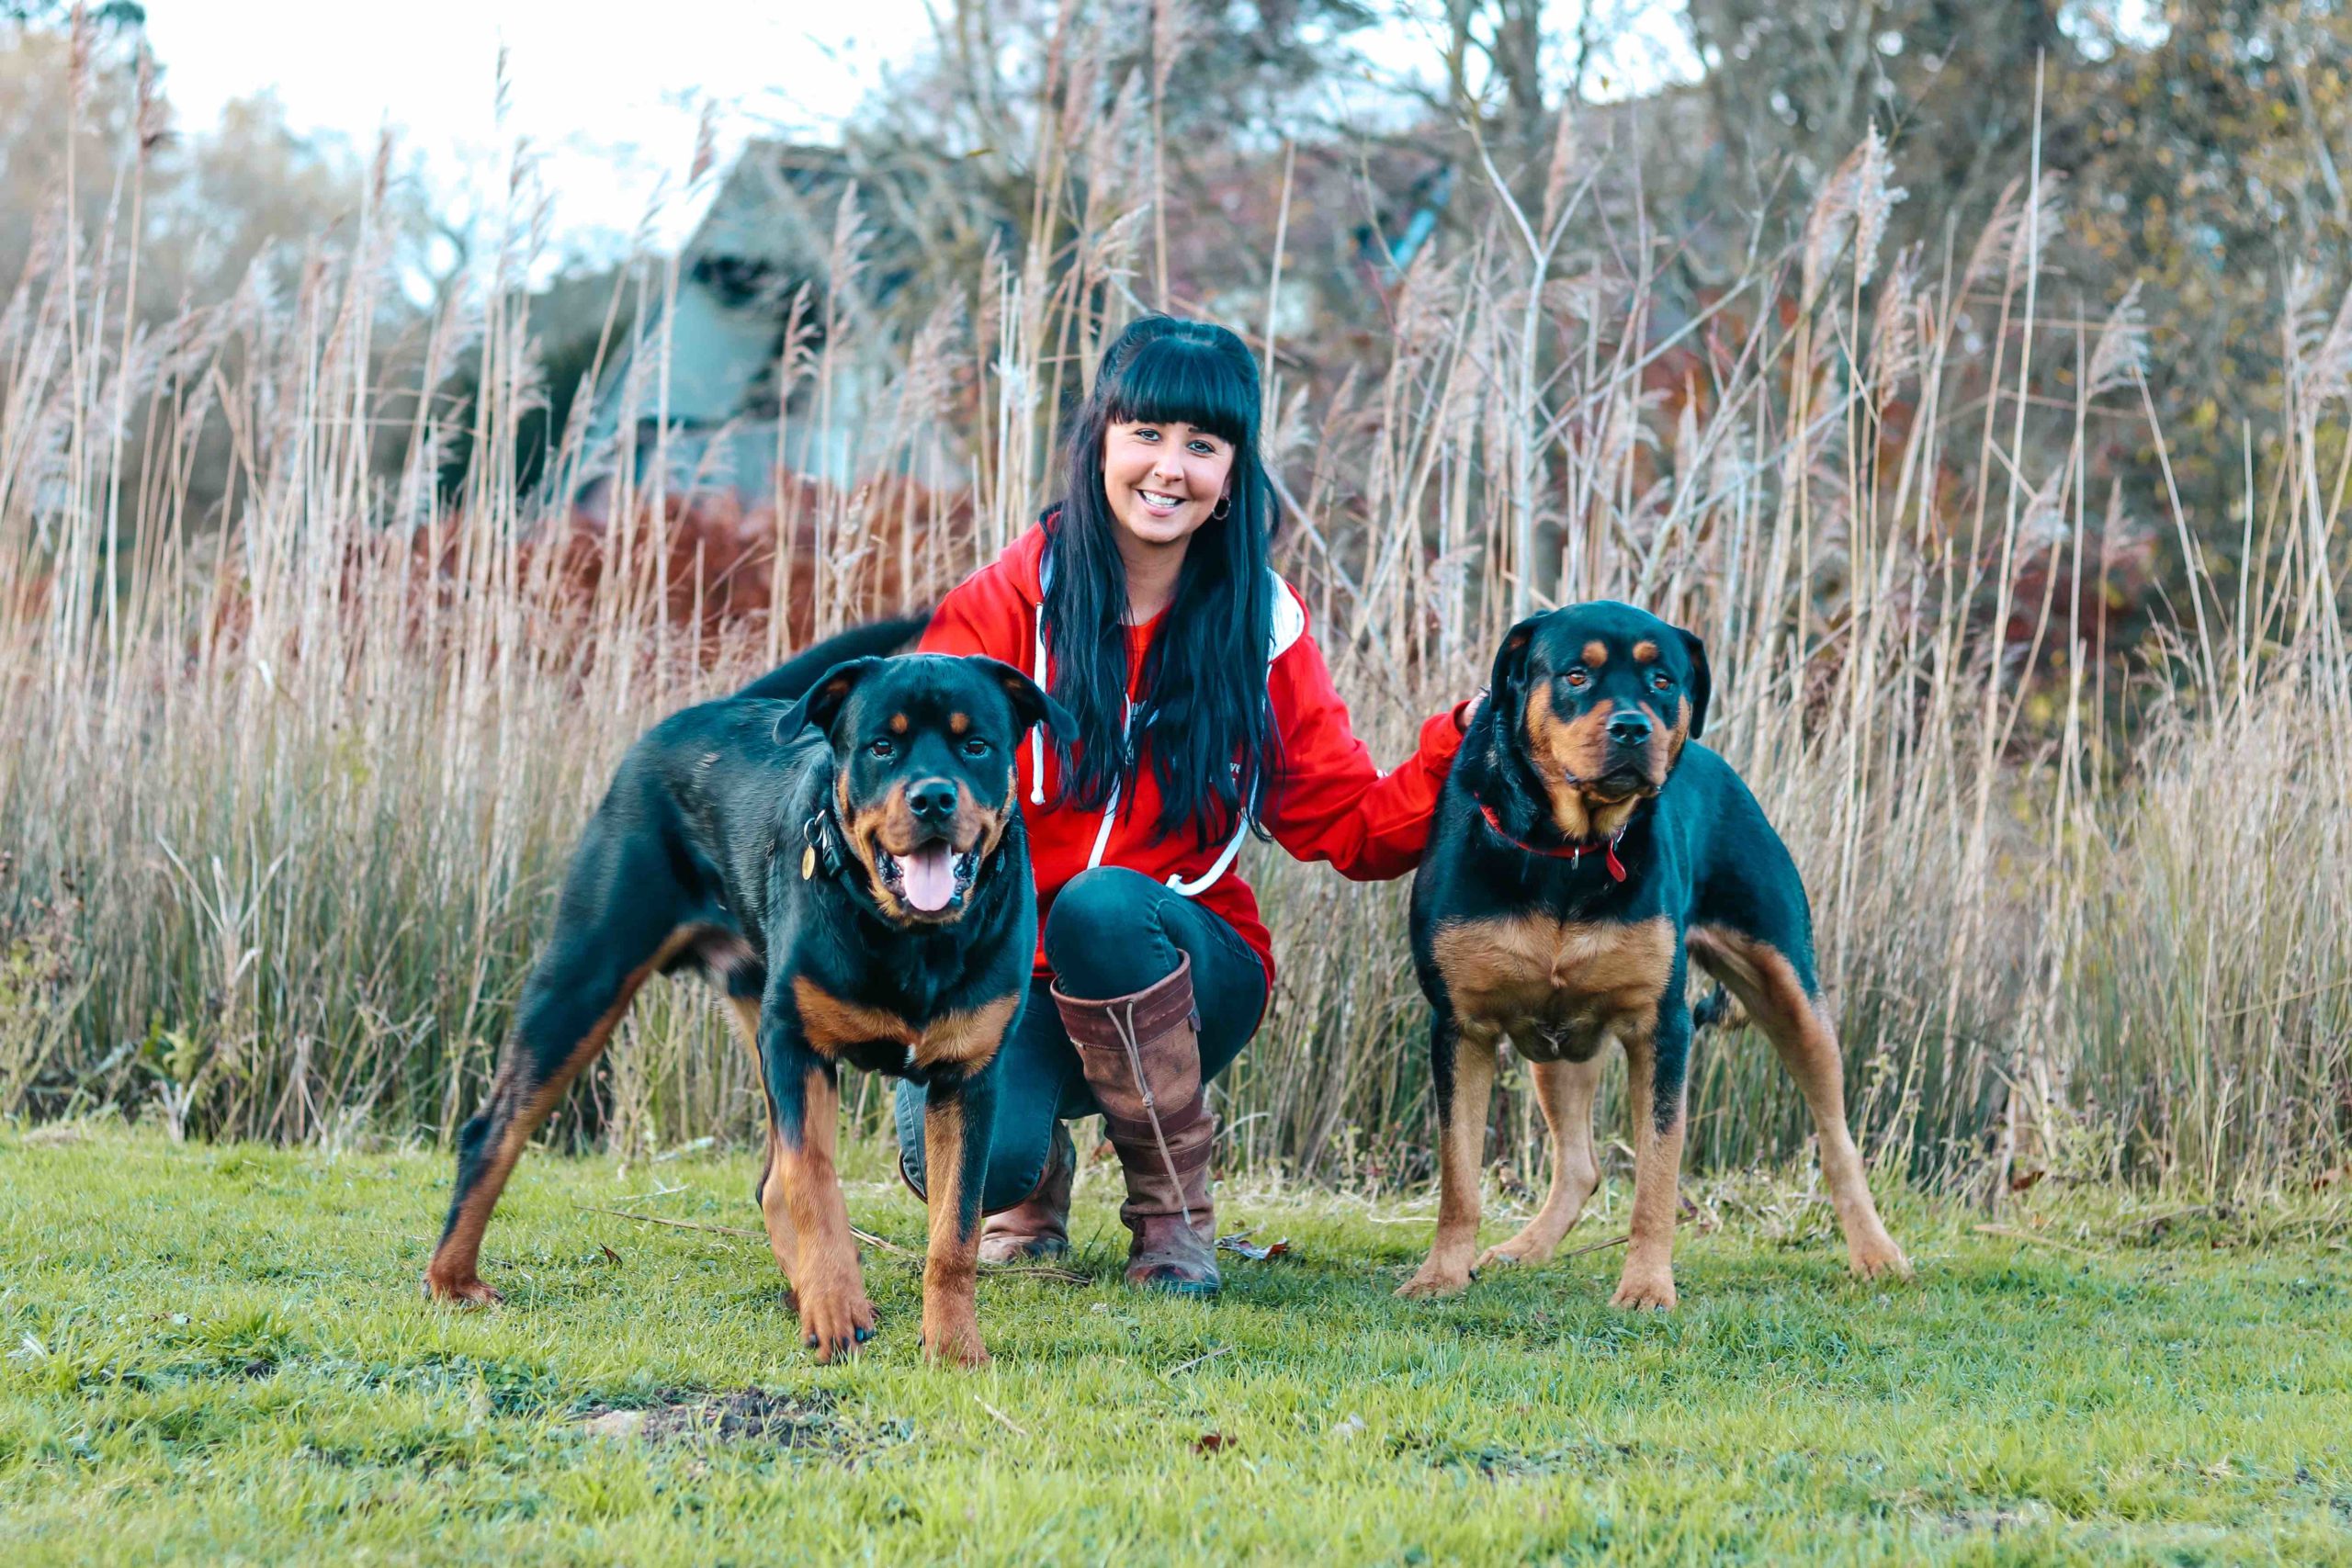 Danielle from We Love Pets kneeling with two dogs